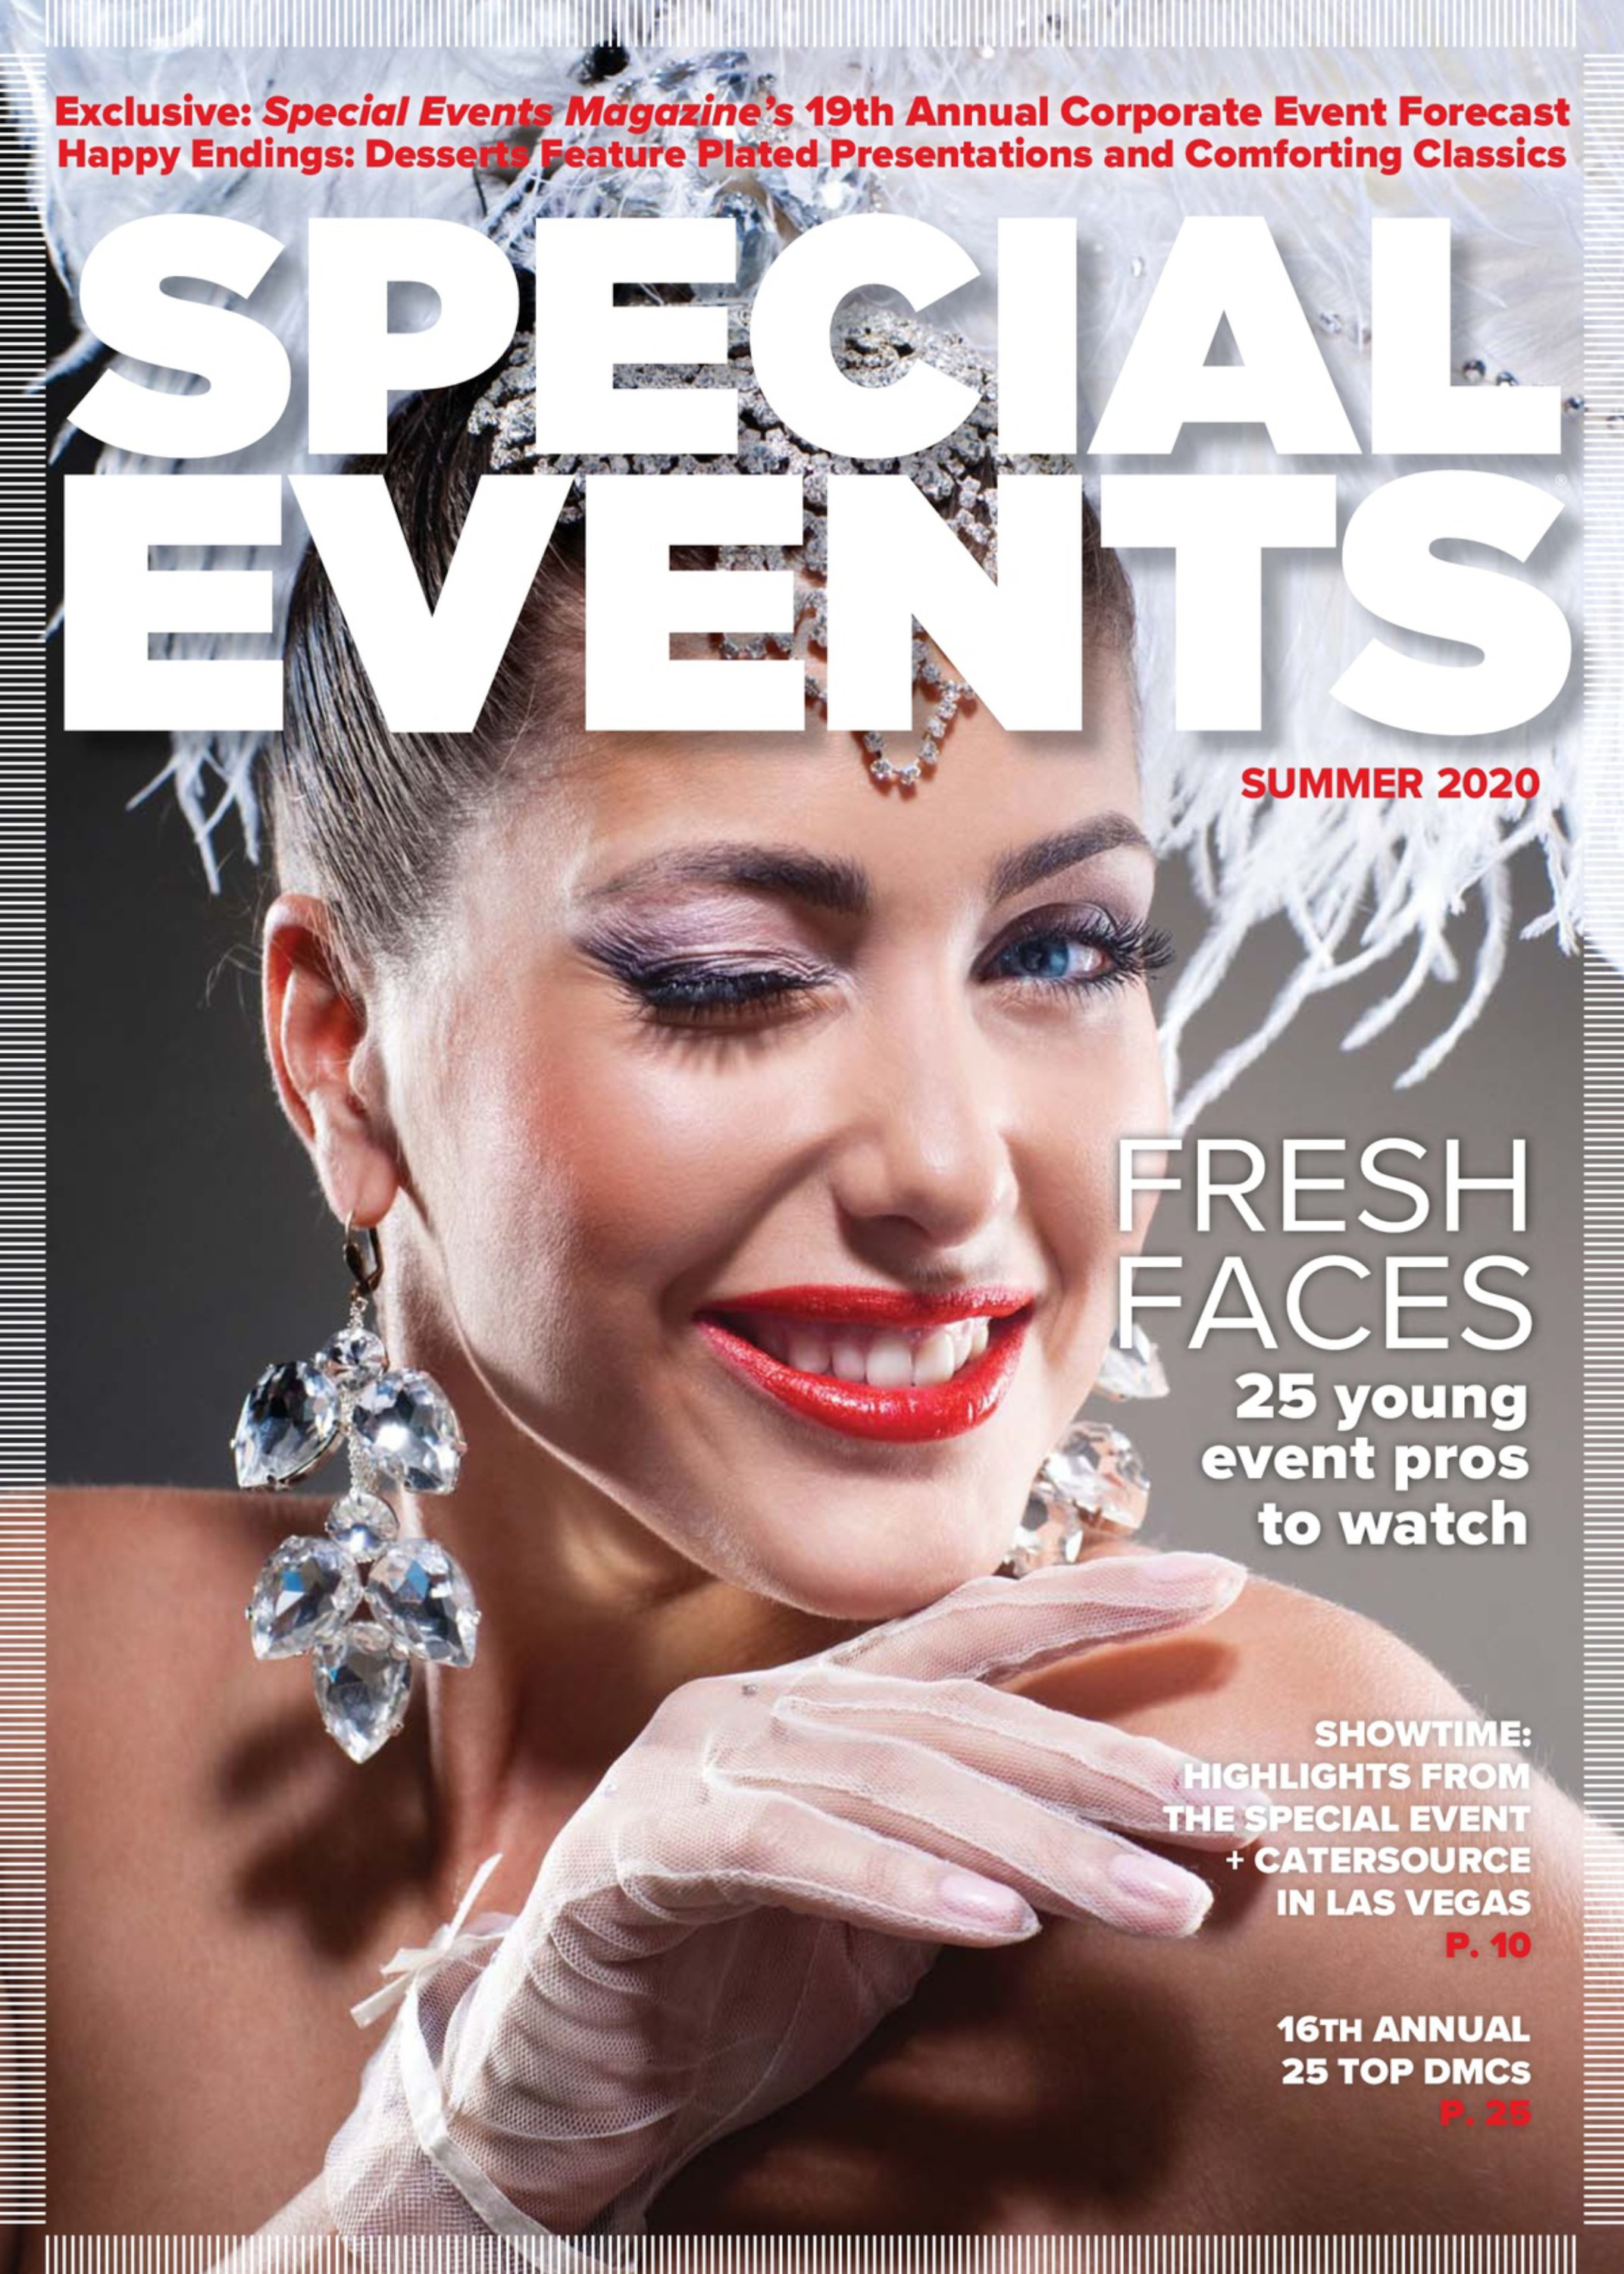 Special Events Magazine Summer 2020 cover featuring a performer with gloves and feathers in her hair winking